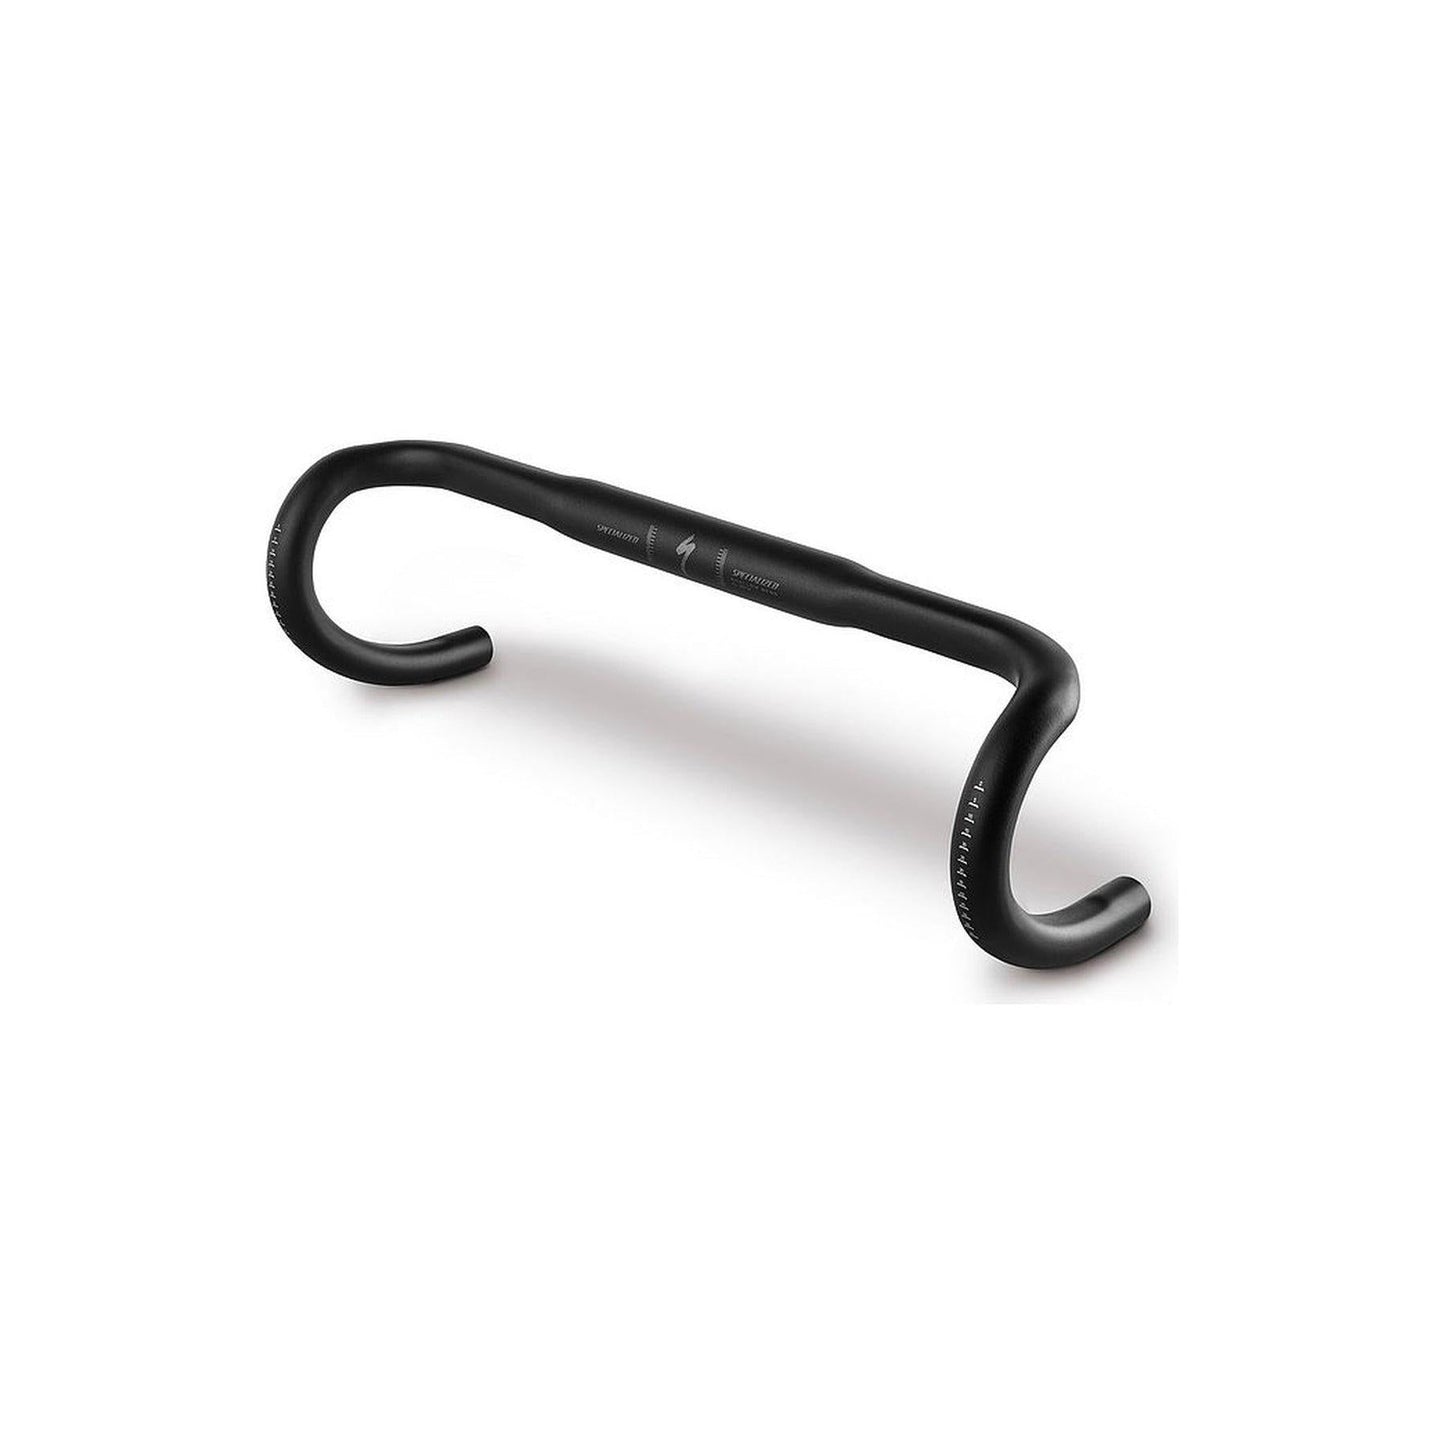 Expert Alloy Shallow Bend Handlebar | completecyclist - With the same ergonomic benefits as the S-Works version, the Expert Shallow delivers a strong and affordable bar with no compromise.